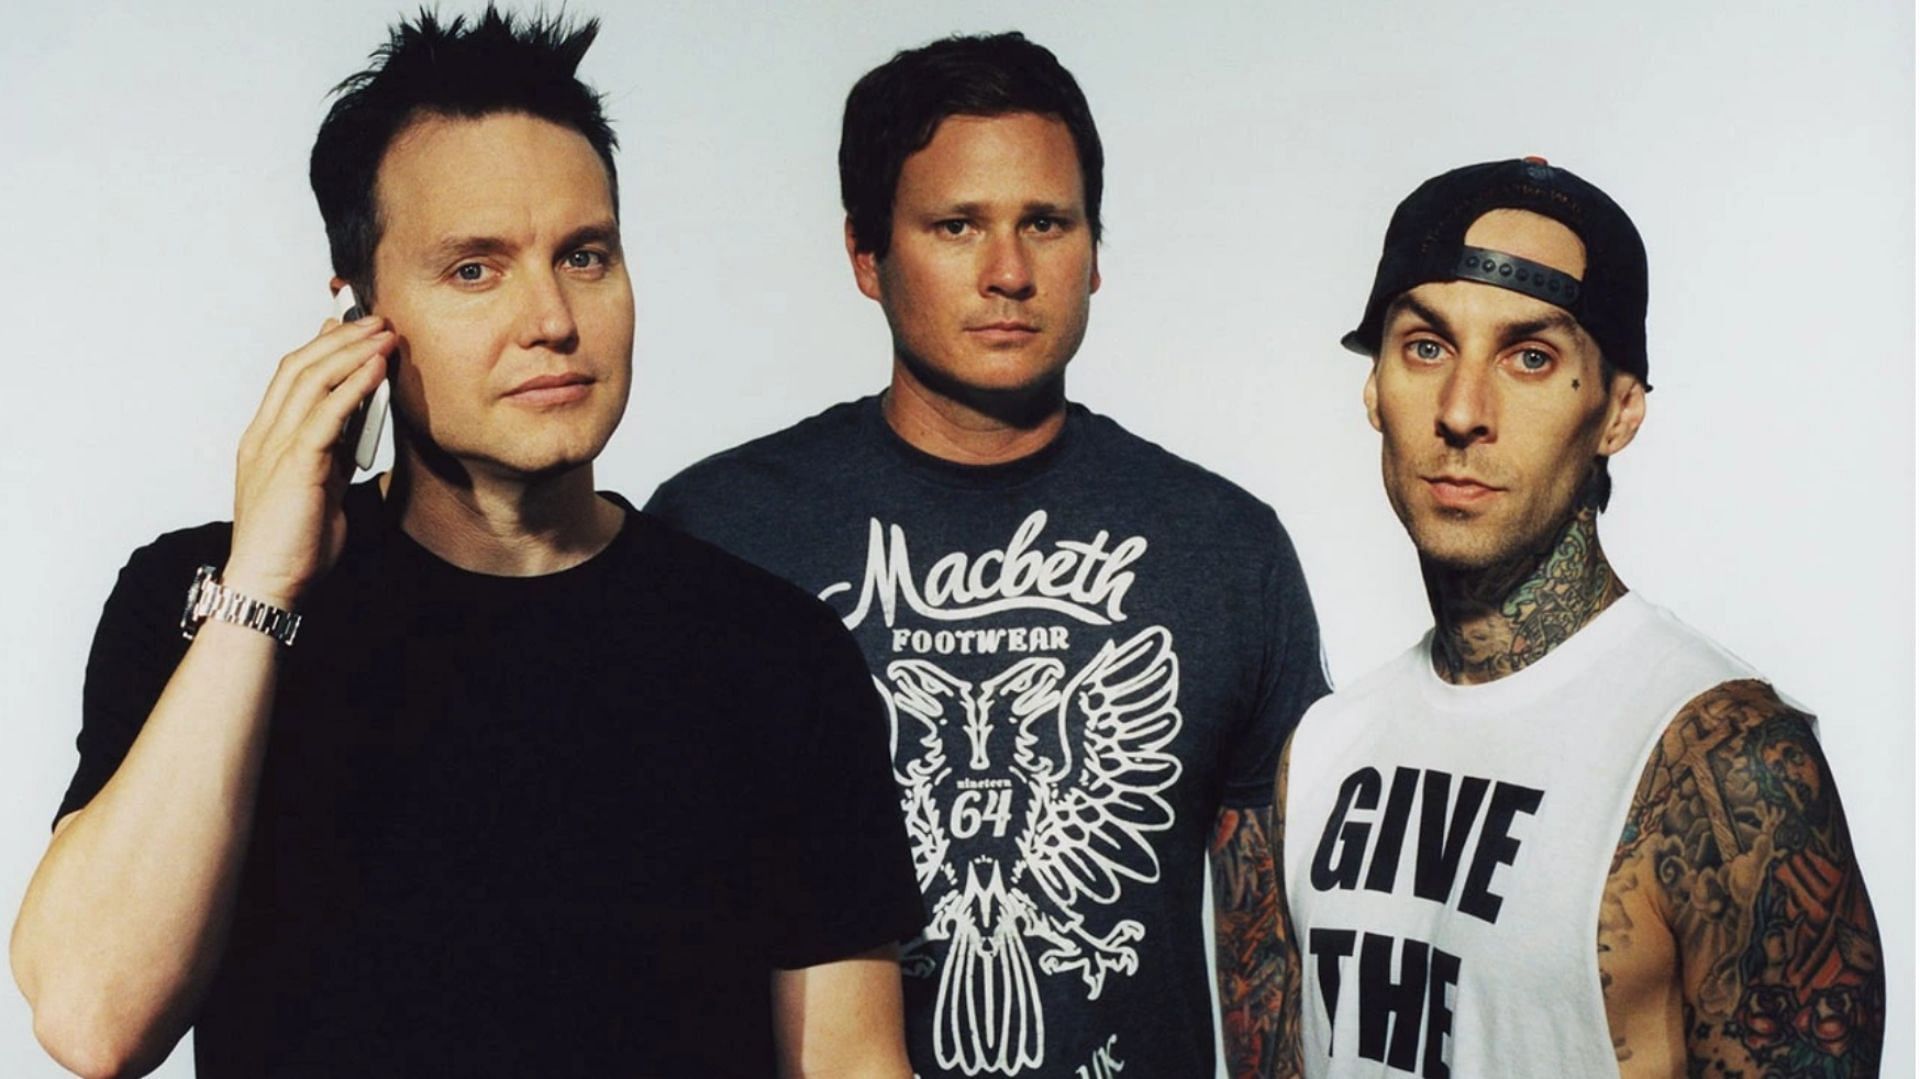 Blink-182 reunion tour 2022: Dates, tickets, where to buy and more